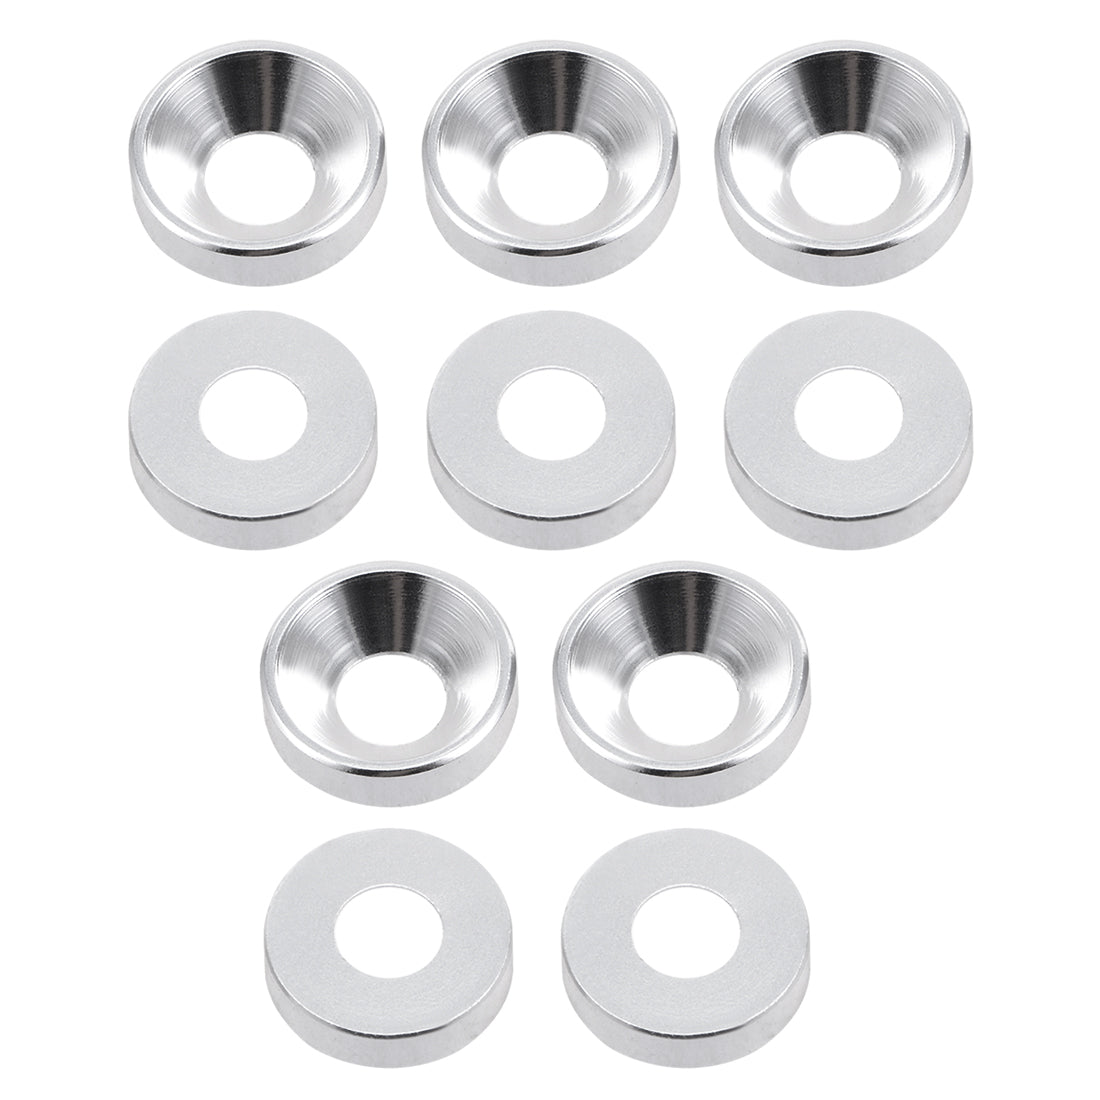 Uxcell Uxcell 10 Pcs 12mm x 5mm x 3.2mm Aluminum Alloy Countersunk Washer Silver